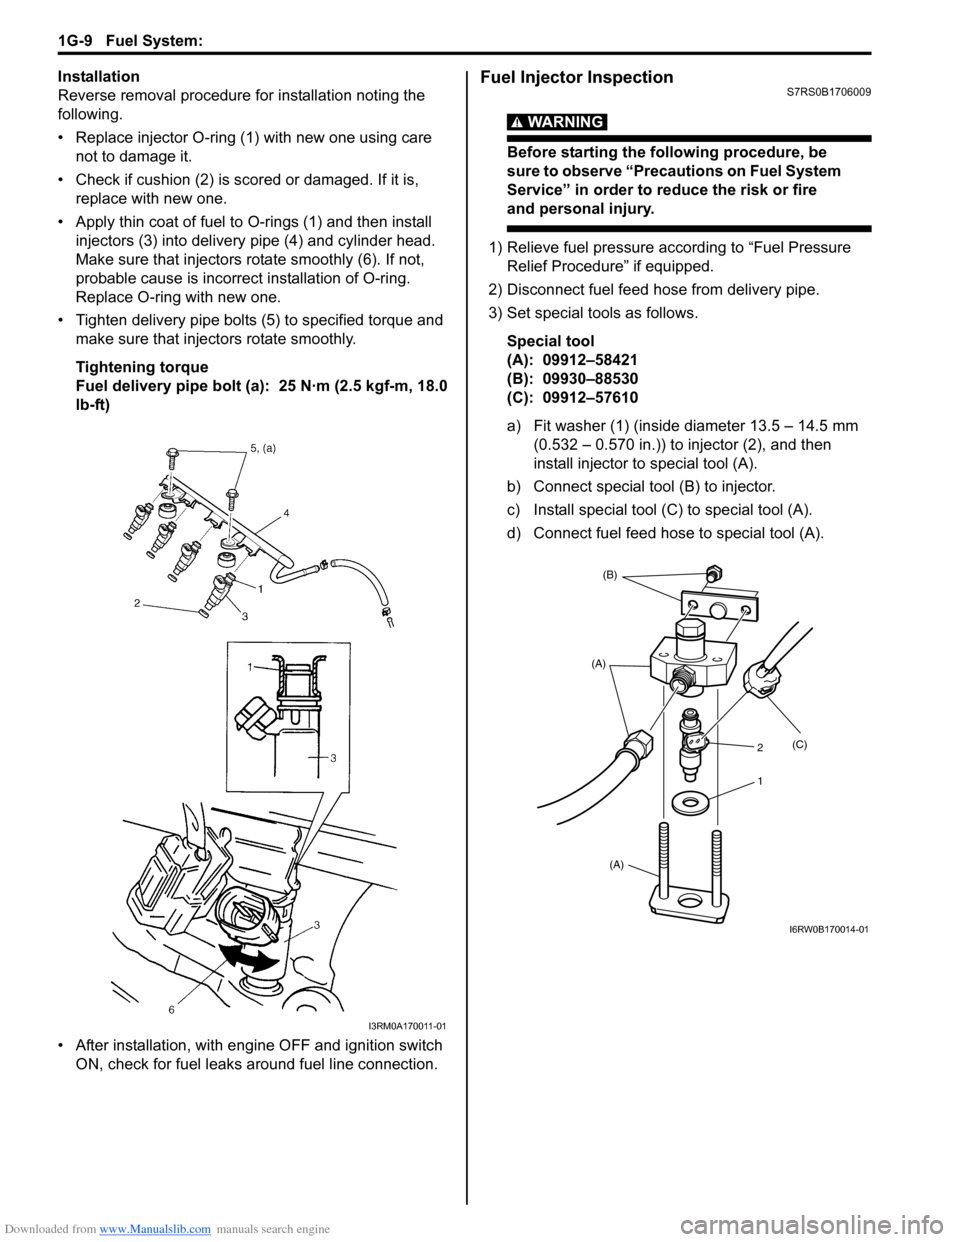 SUZUKI SWIFT 2008 2.G Service Repair Manual Downloaded from www.Manualslib.com manuals search engine 1G-9 Fuel System: 
Installation
Reverse removal procedure for installation noting the 
following.
• Replace injector O-ring (1) with new one 